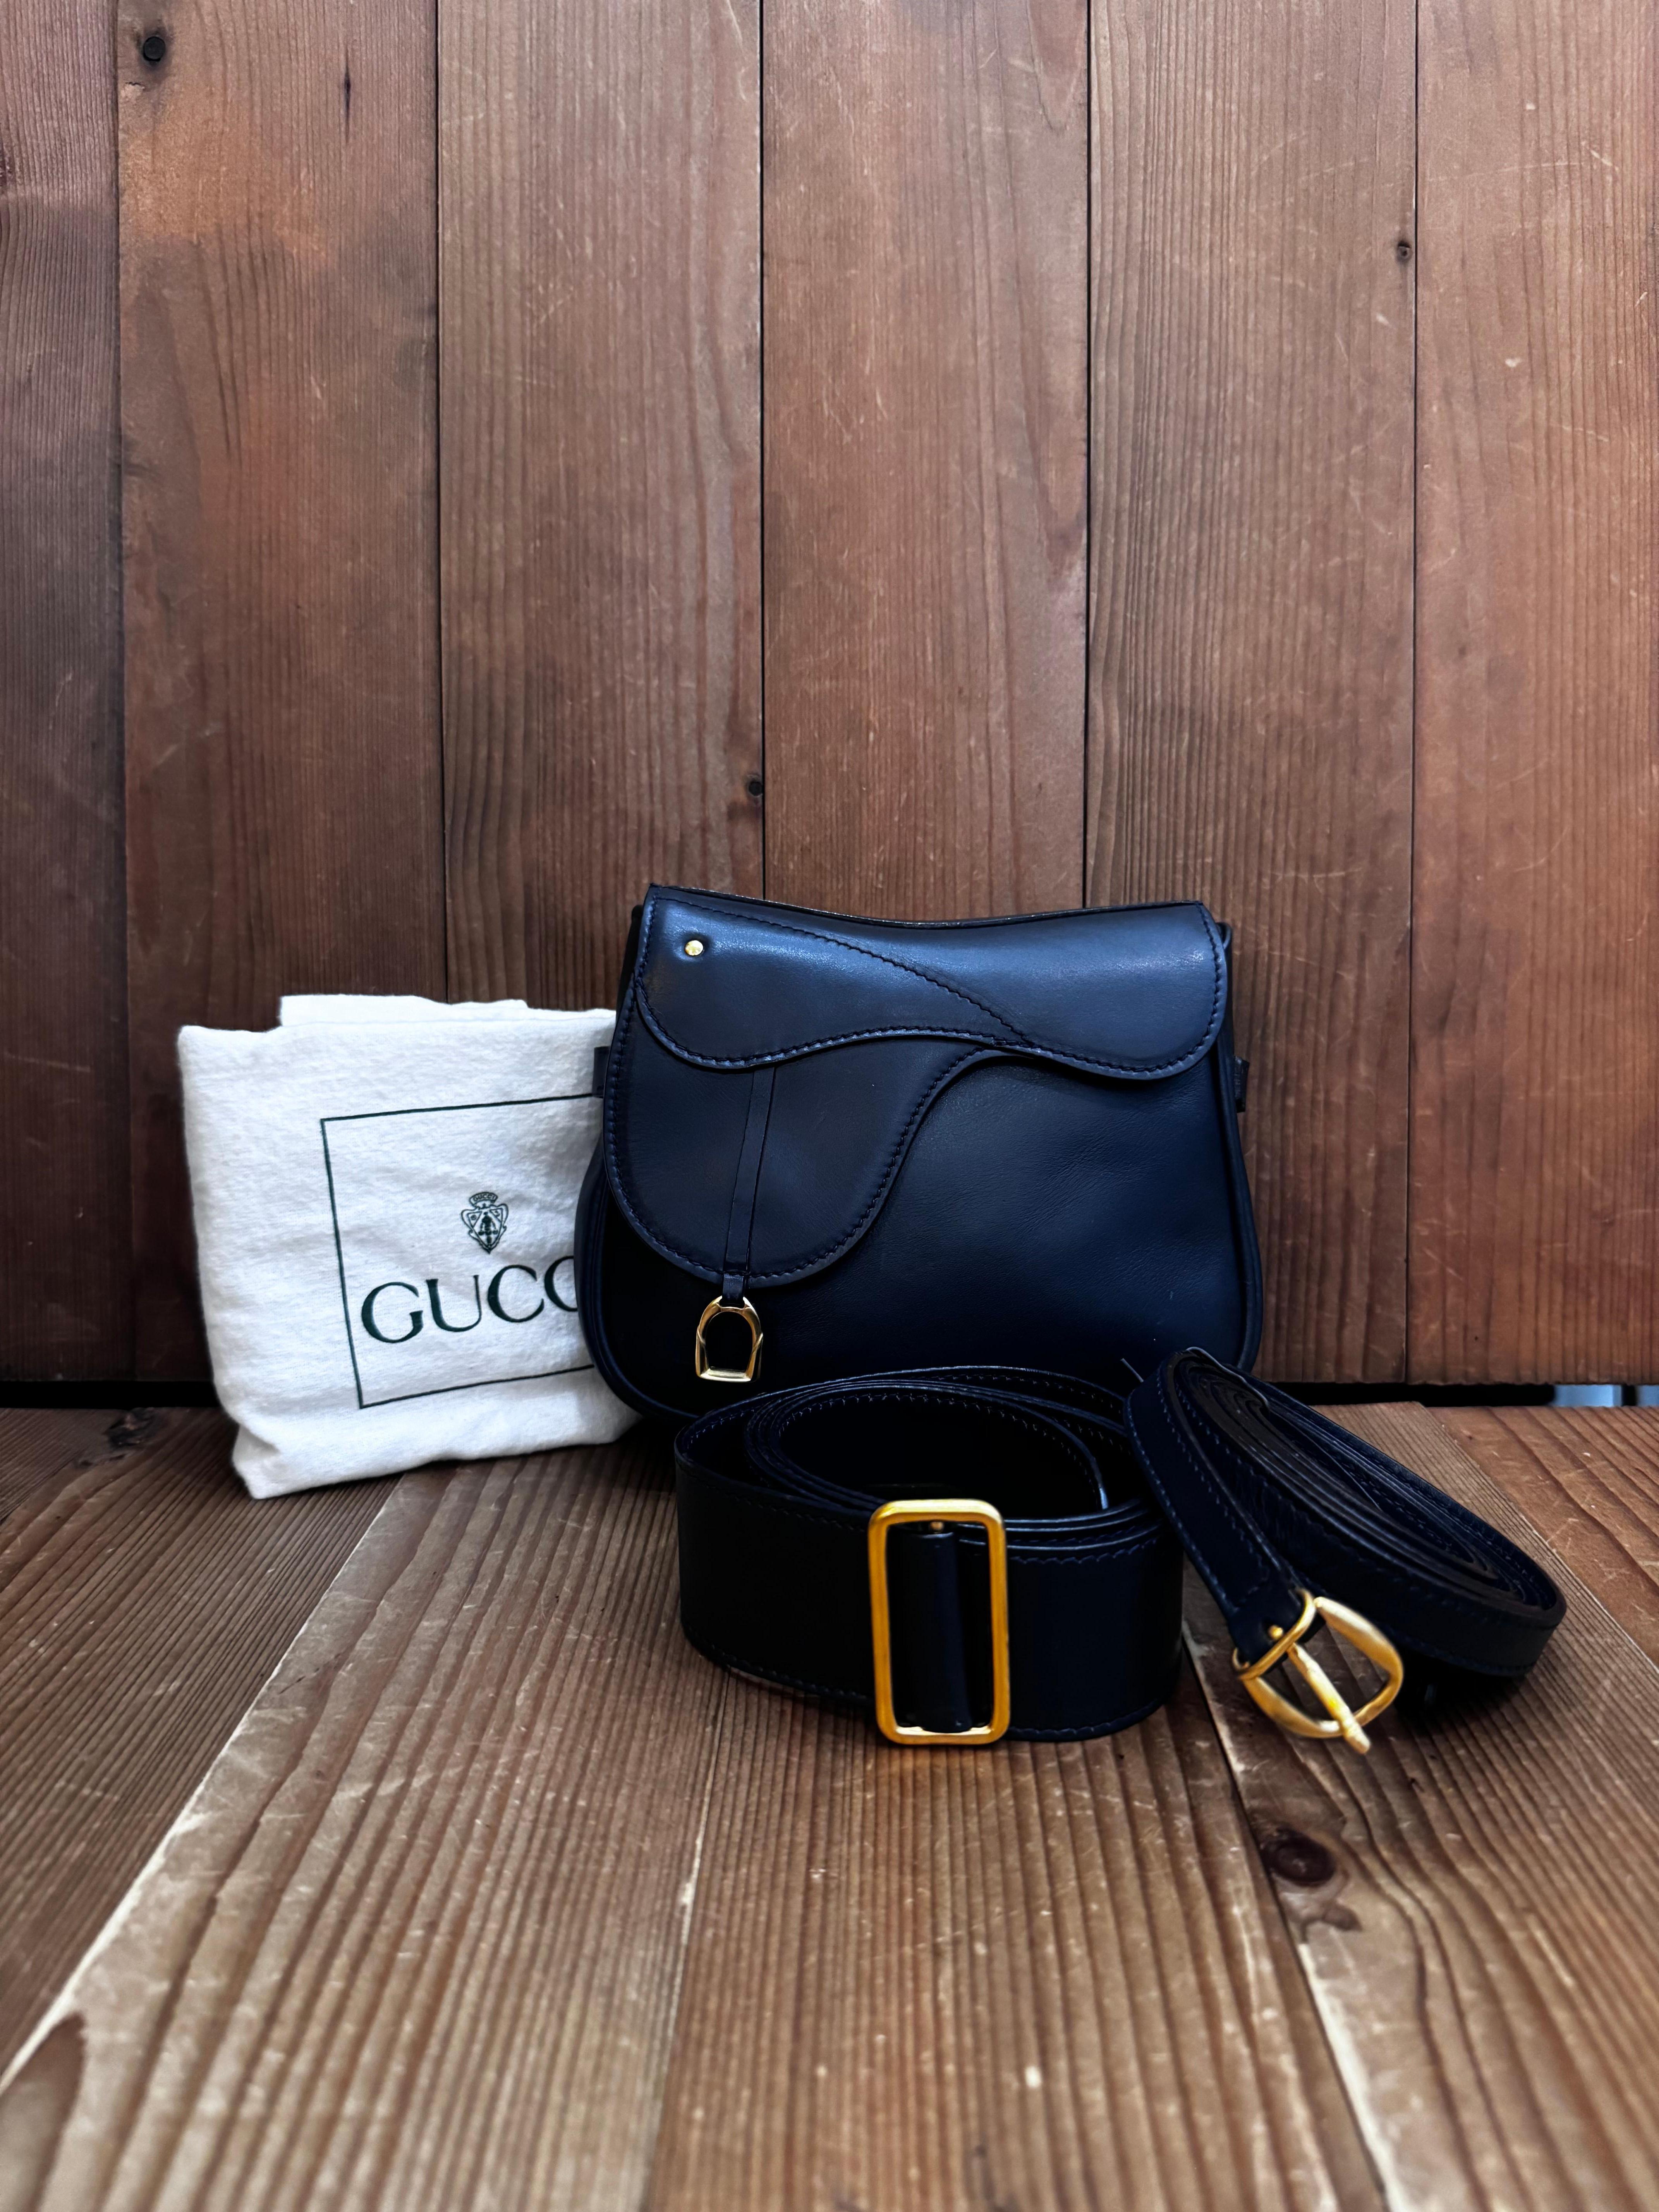 This vintage GUCCI mini two-way saddle bag is crafted of smooth calfskin leather in navy featuring gold toned hardware. This bag features a detachable crossbody strap and a belt of the same leather for wearing as a crossbody bag or around the waist.